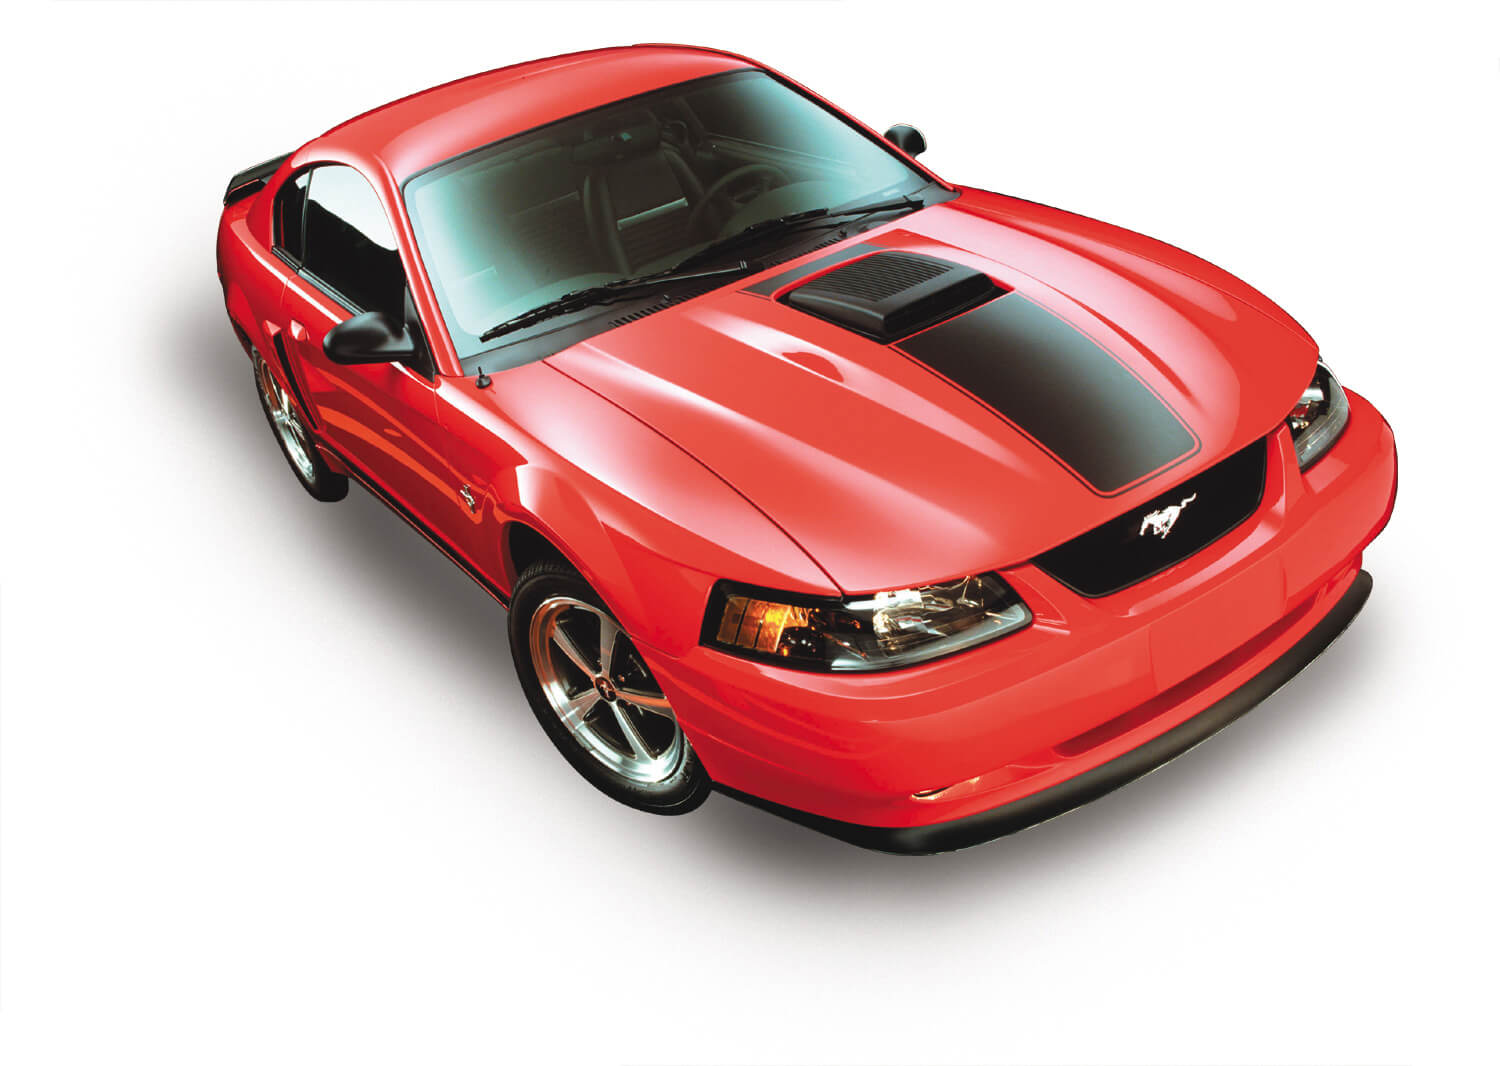 2003 Ford Mustang Mach I